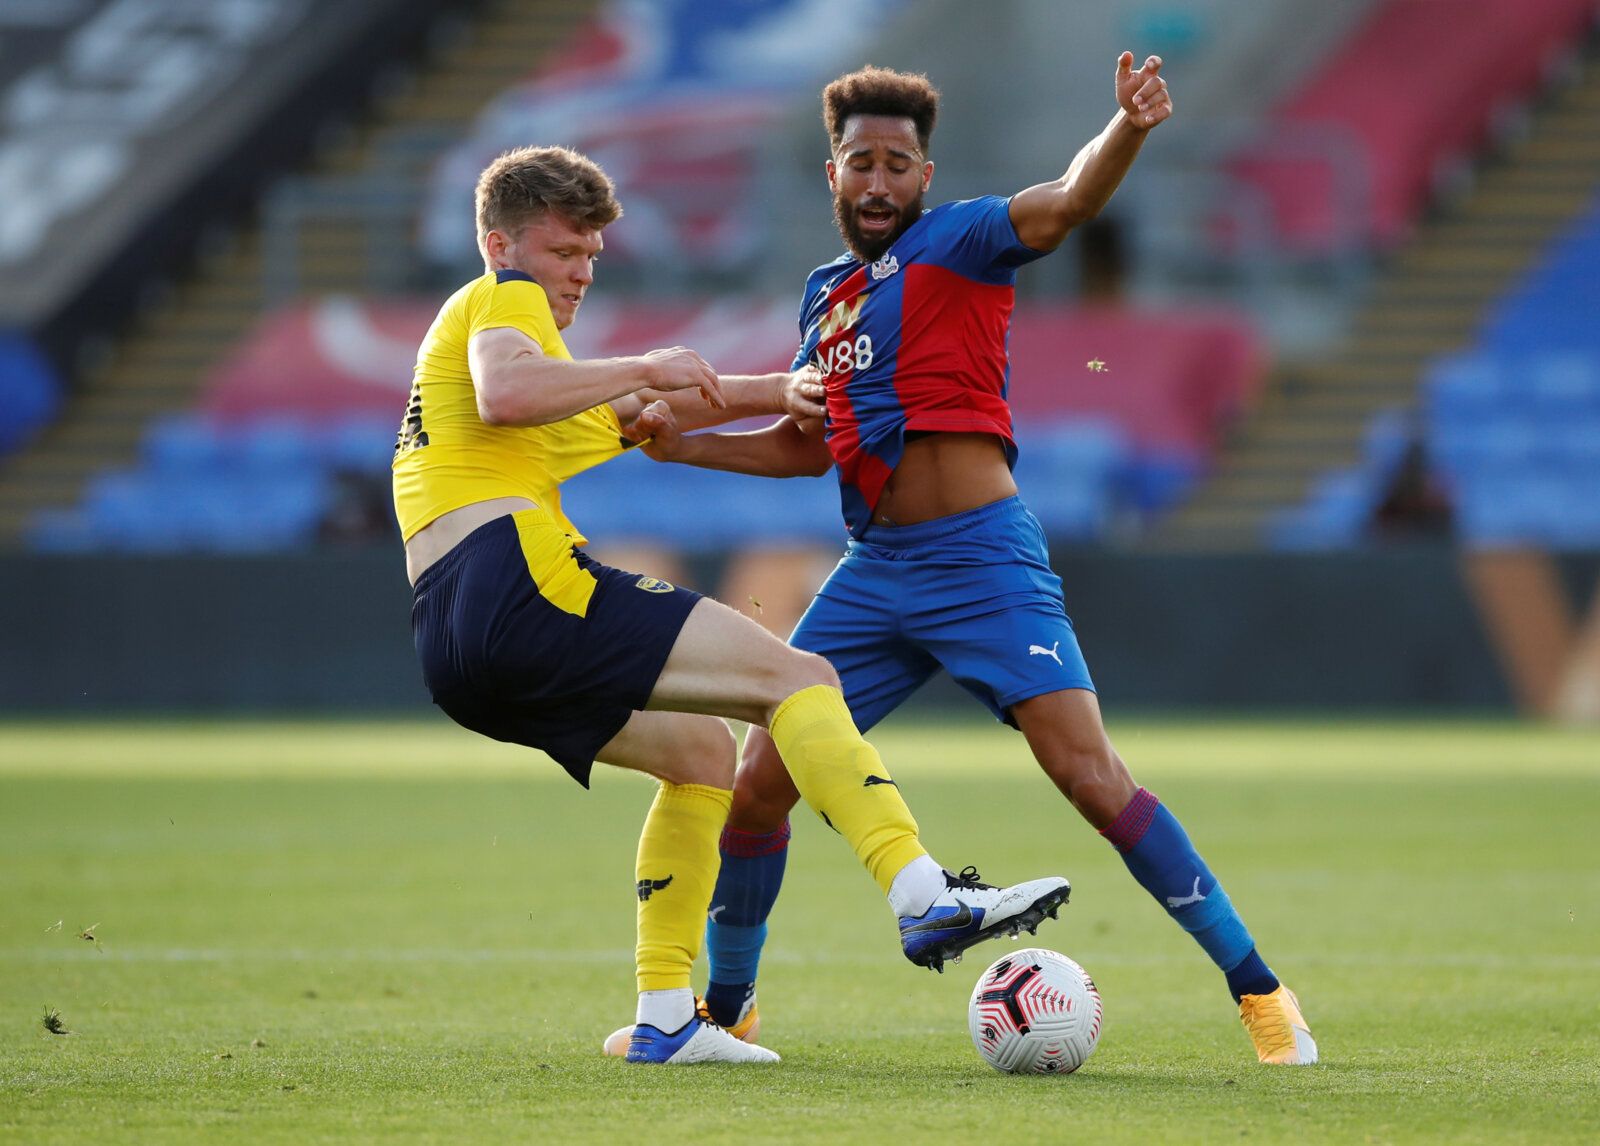 Soccer Football - Pre Season Friendly - Crystal Palace v Oxford United - Selhurst Park, London, Britain - August 25, 2020  Crystal Palace's Andros Townsend in action with Oxford United's Rob Dickie, as play resumes behind closed doors following the outbreak of the coronavirus disease (COVID-19)  Action Images via Reuters/Paul Childs